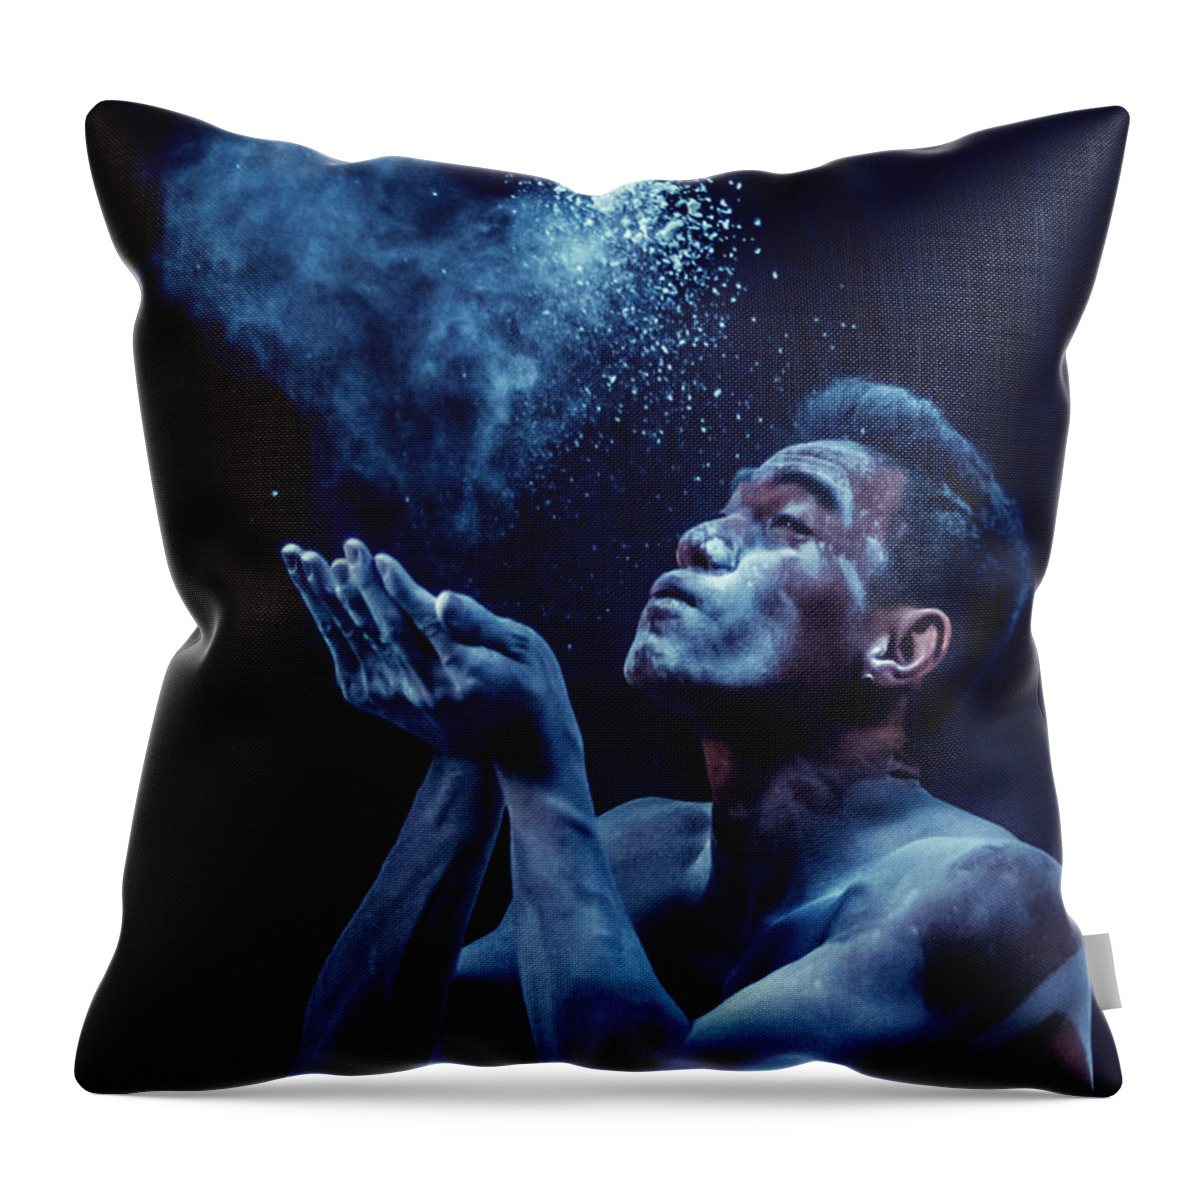 Photography Throw Pillow featuring the photograph Creation 3 by Rick Saint